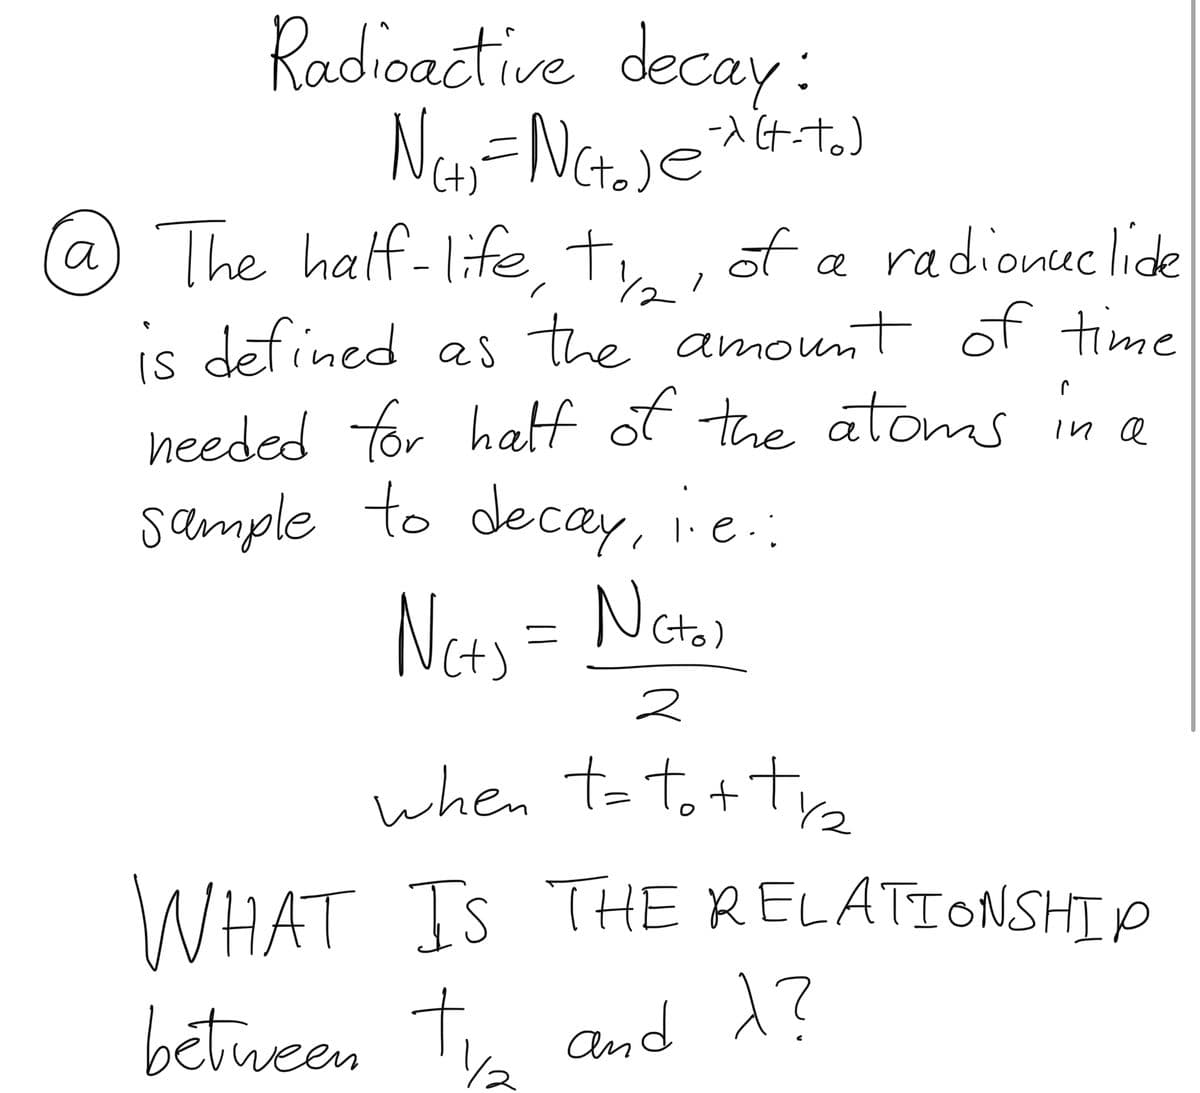 Radioactive decay:
N(+₁ = N(+₂) @²x (+-to)
-x
@ The half-life, t₂, of a radionuclide
is defined as the amount of time
needed for half of the atoms in a
sample to decay, i.e.::
Nc+₁ = Ncto)
Nets
е
2
when toto+tra
WHAT IS THE RELATIONSHIP
between typ and 1?